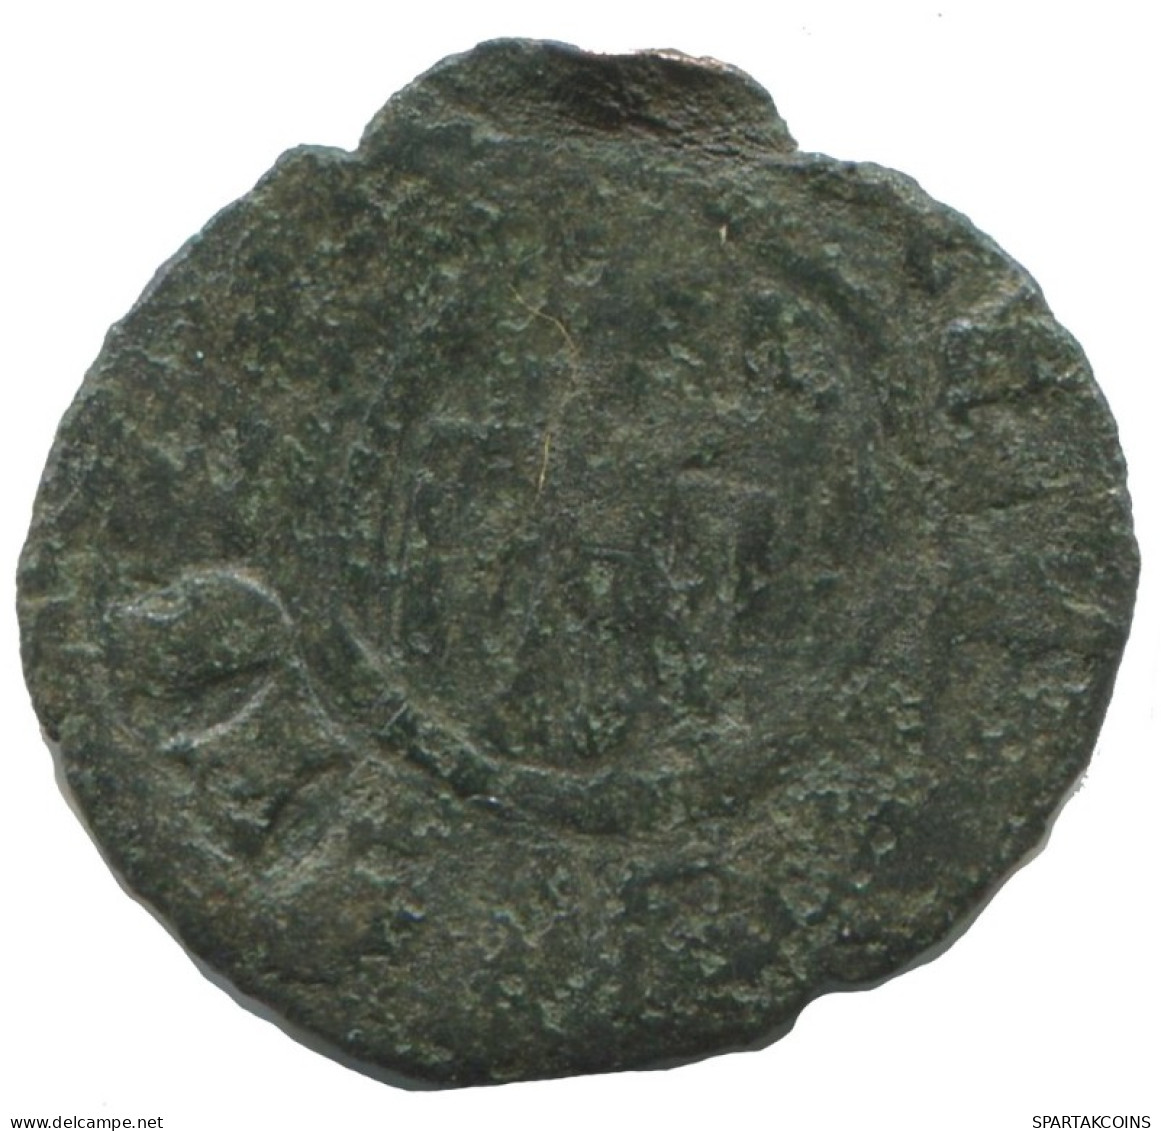 Authentic Original MEDIEVAL EUROPEAN Coin 0.4g/14mm #AC240.8.E.A - Other - Europe